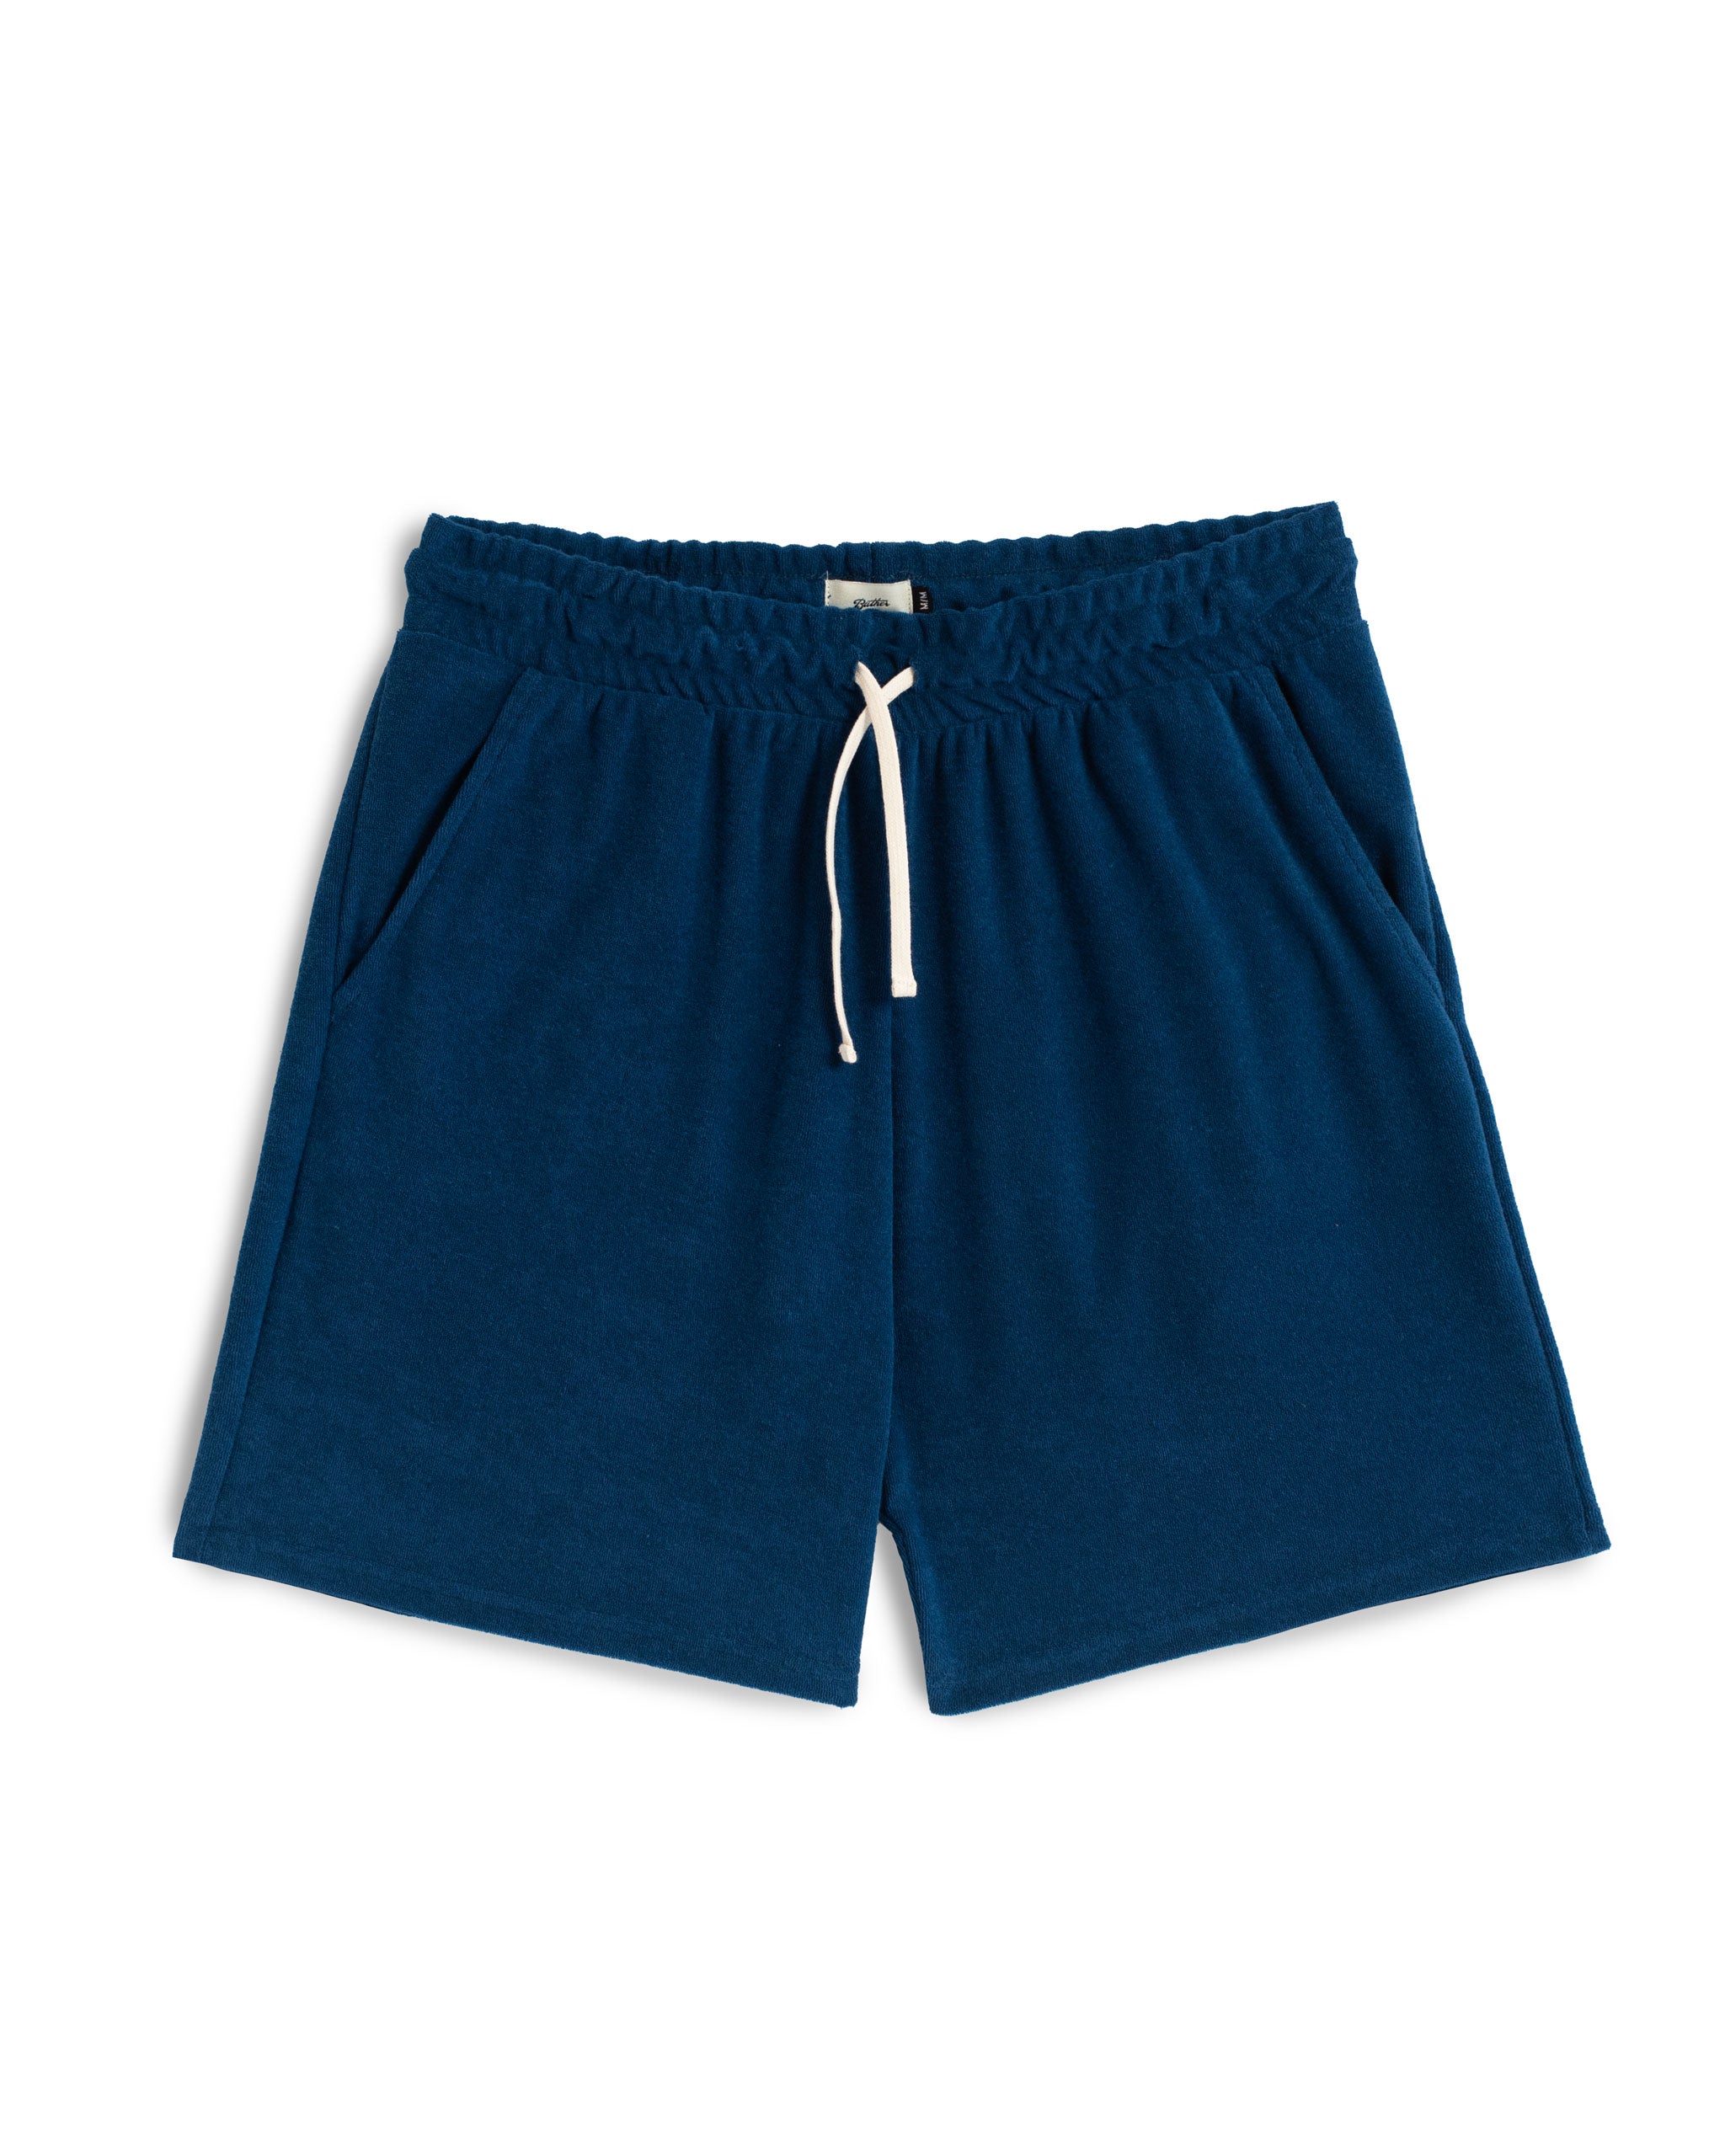 Solid Navy Towel Terry Cotton Sweat Shorts